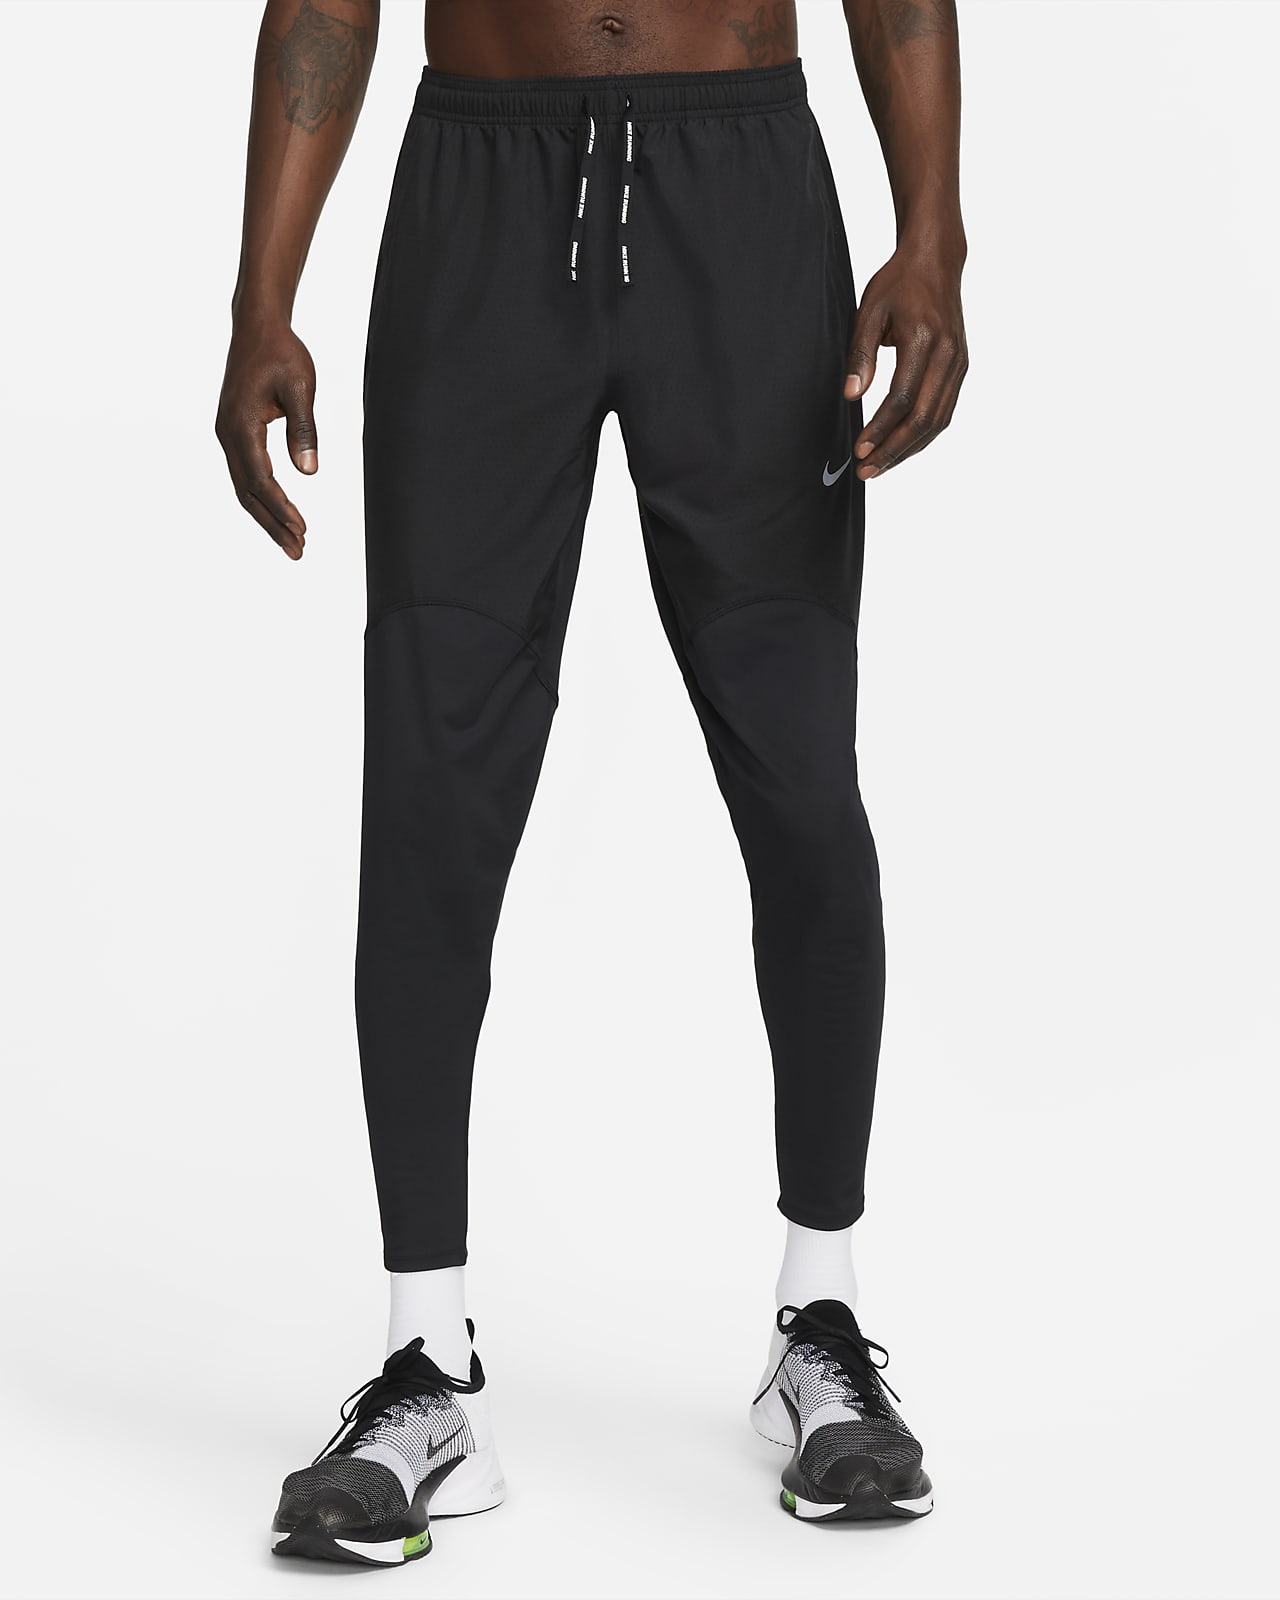 Nike Dri-FIT Men's Brief-Lined Racing Trousers